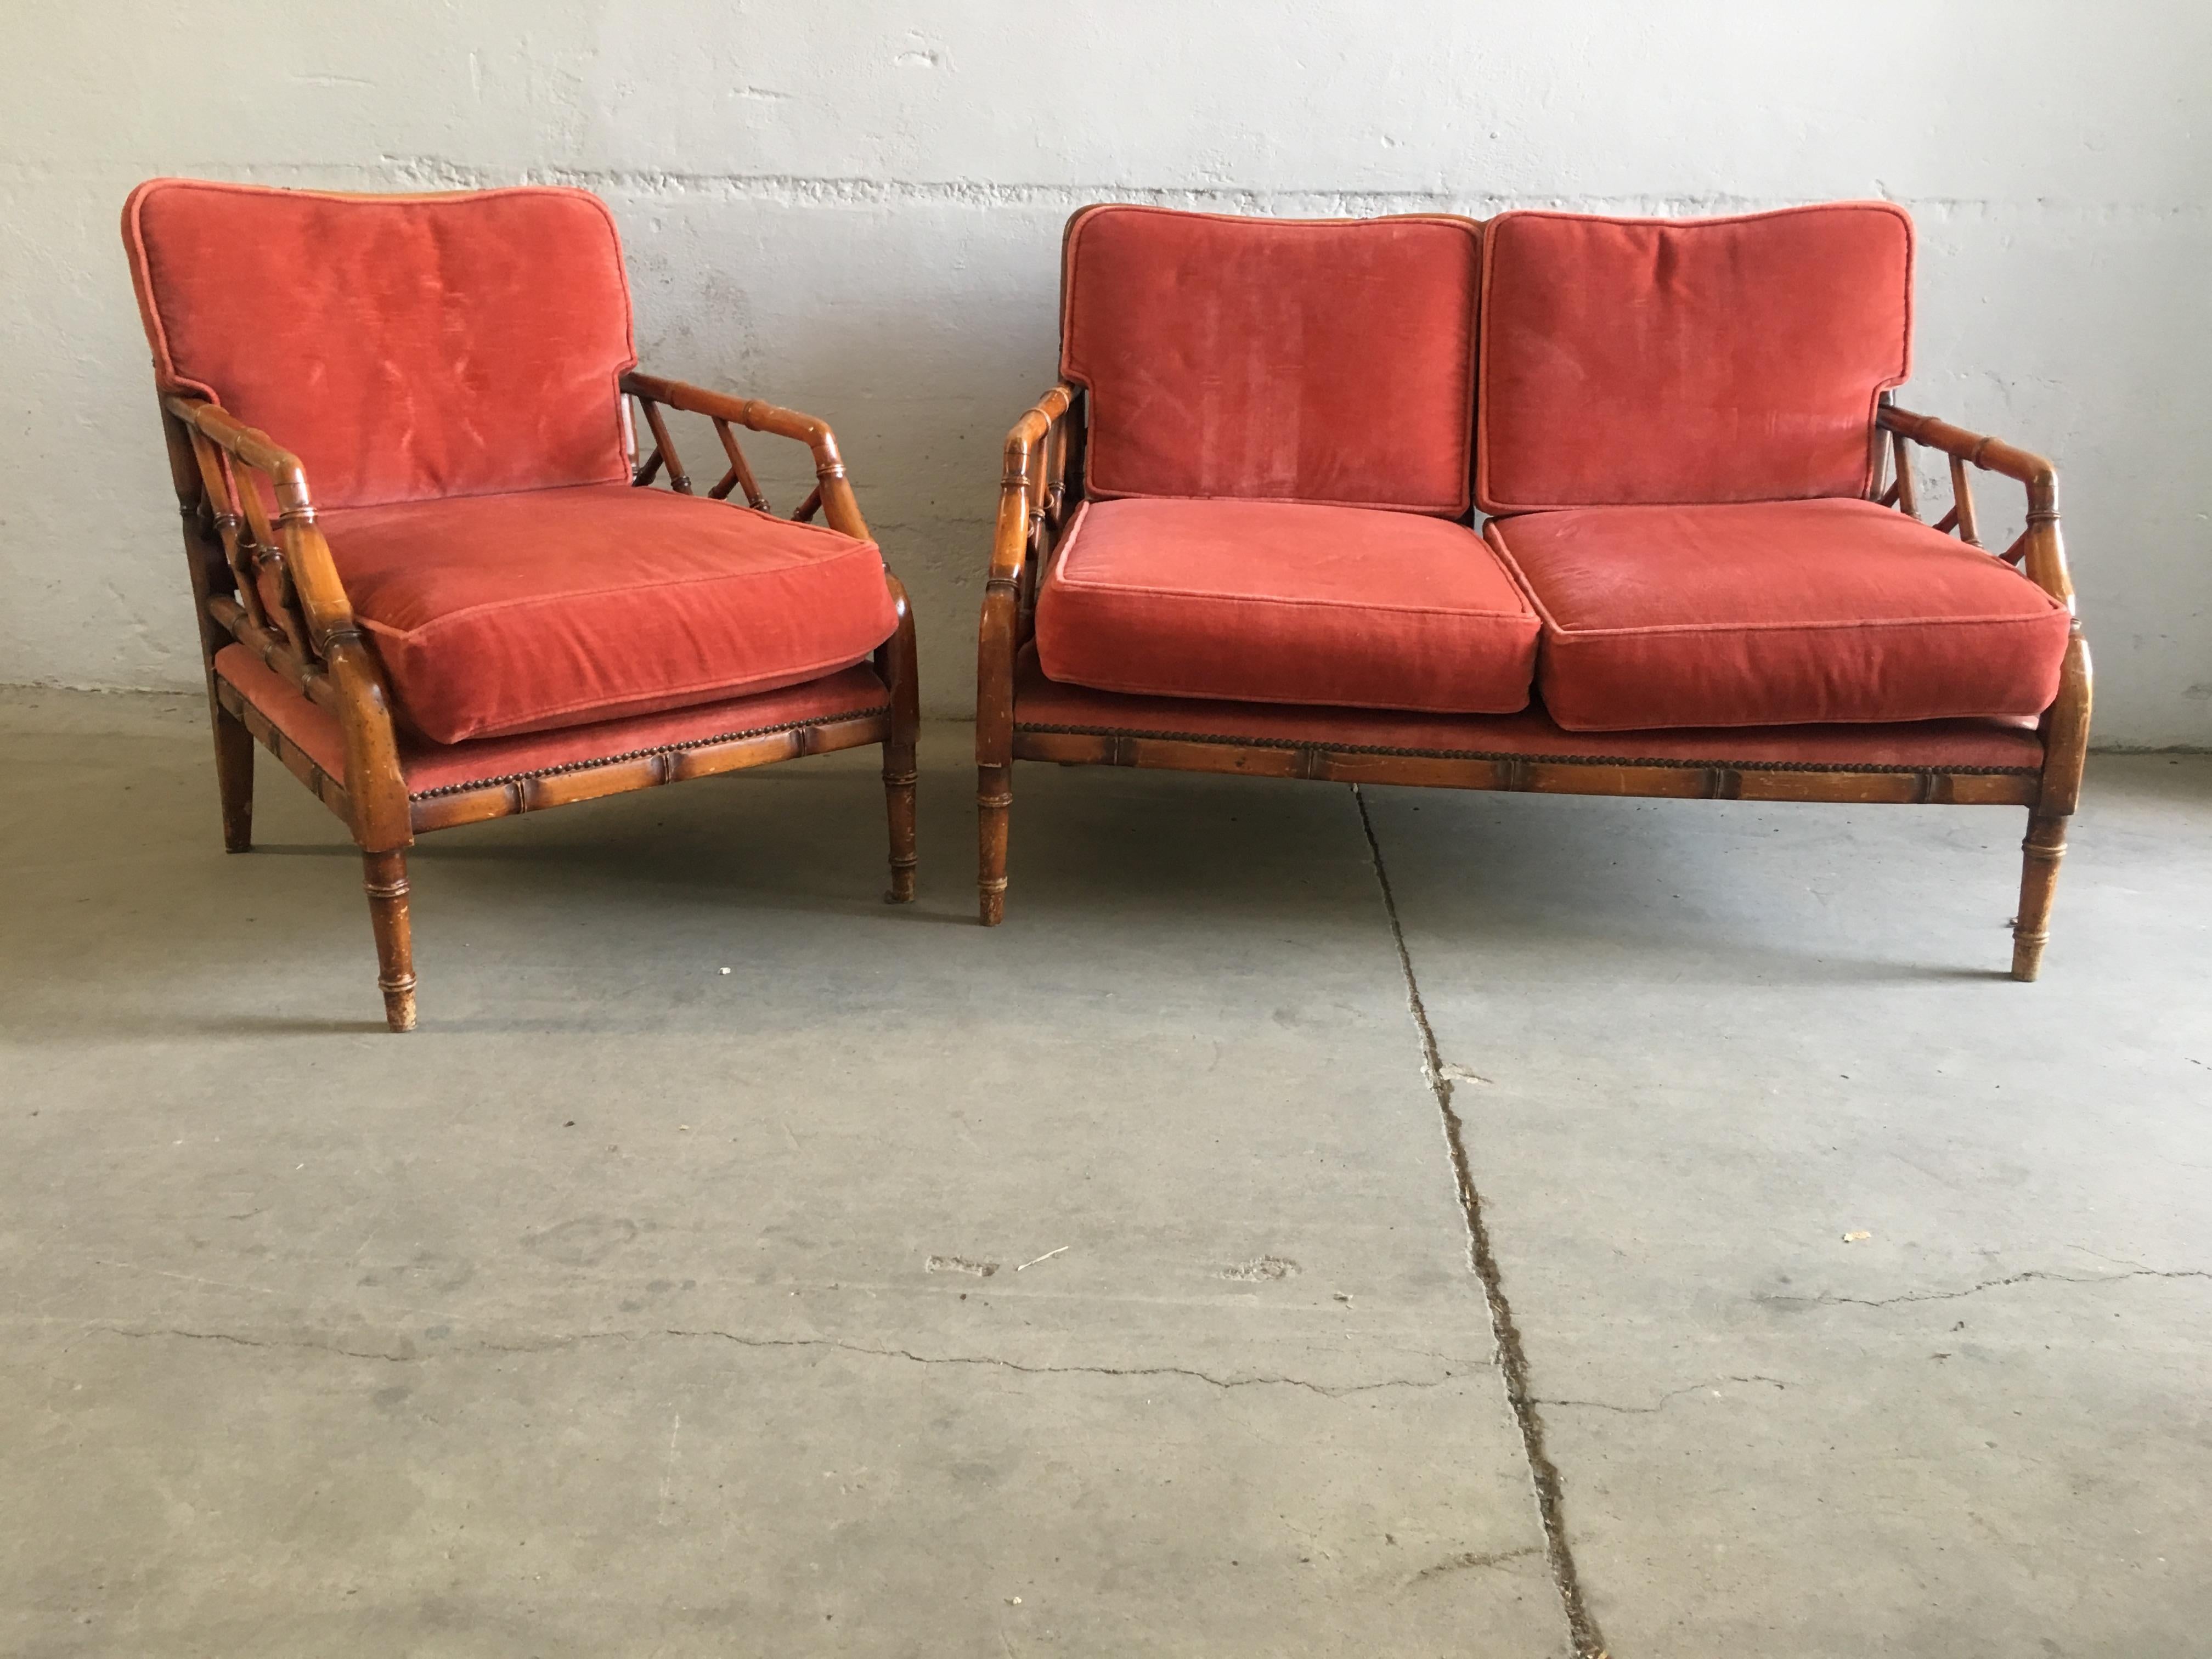 Mid-Century Modern Italian faux bamboo living room set with original velvet upholstery.
The set consists of one two-seat sofa and one armchair
Measurements:
Sofa length cm.115, width cm.65, height cm.77 (seat height cm.44)
Armchair length cm.63,